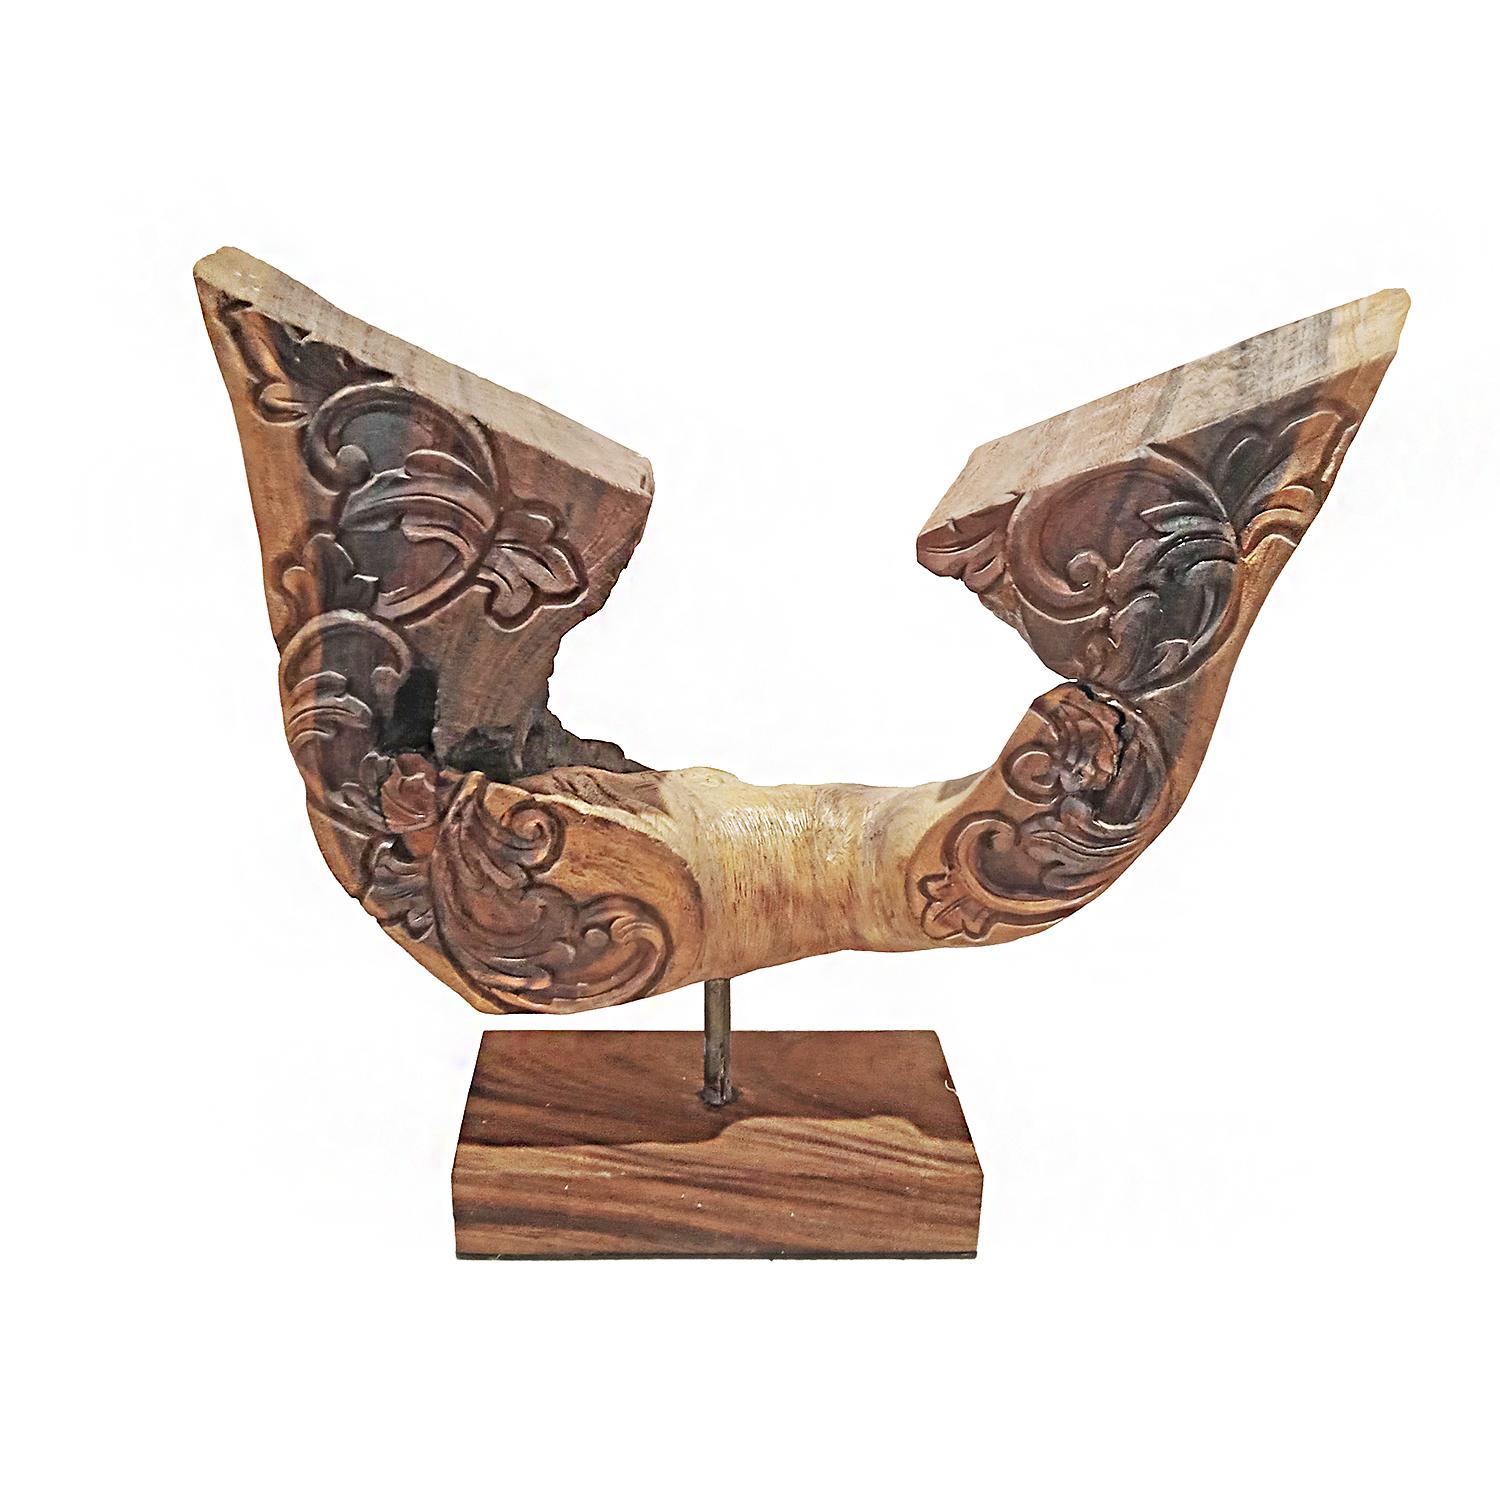 Organic Modern Indonesian Reclaimed Wood Sculpture, Wing-Shaped For Sale